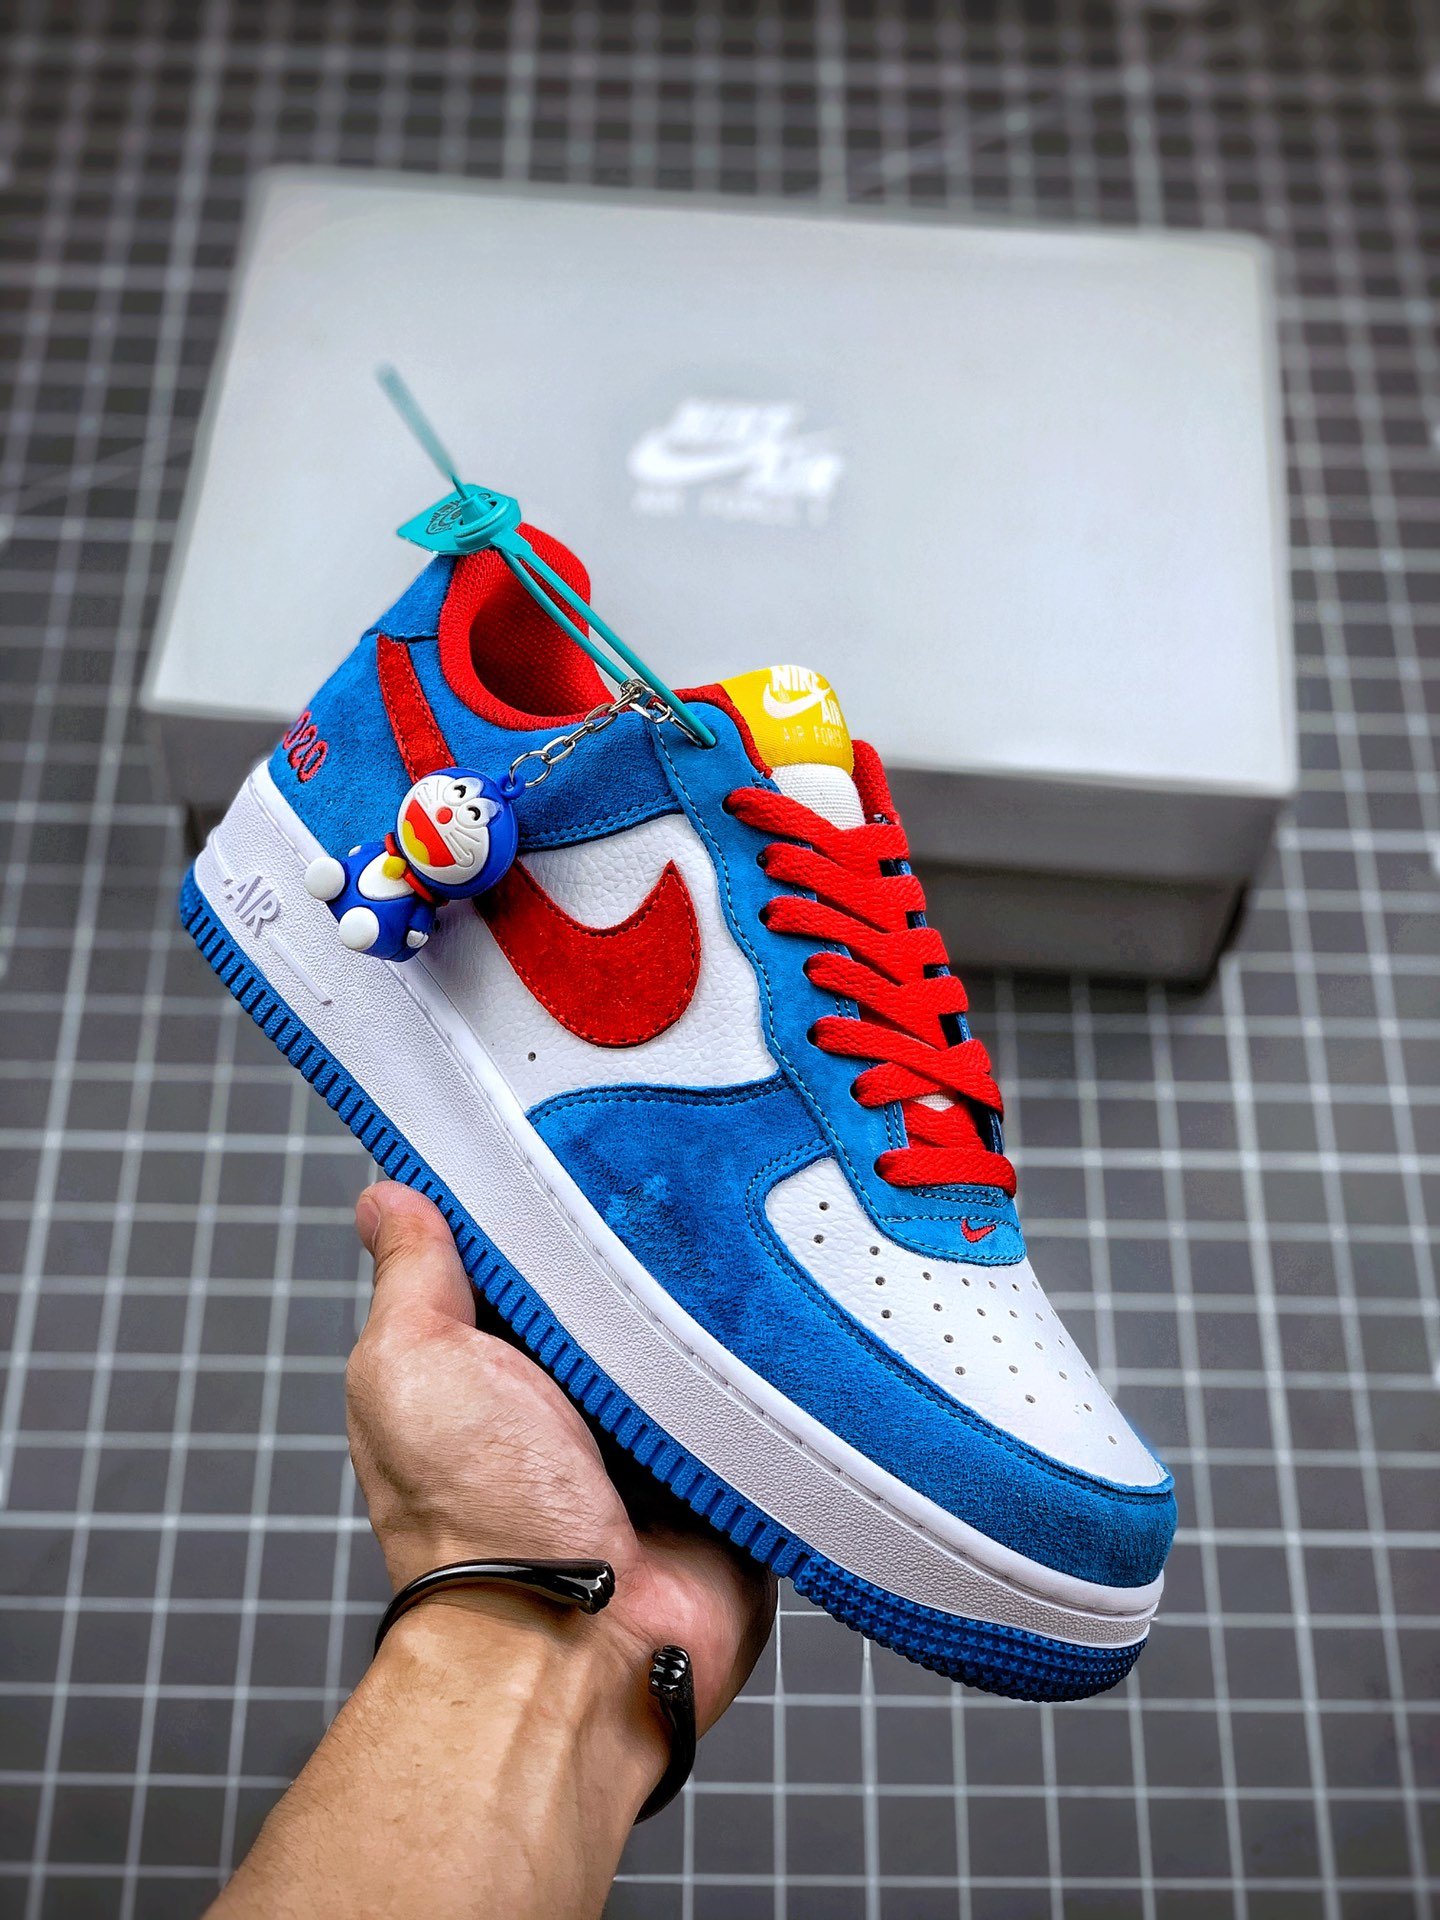 Nike Air AF Force 1 "Doraemon" Light Photo Blue/Speed Yellow-University Red Shoes